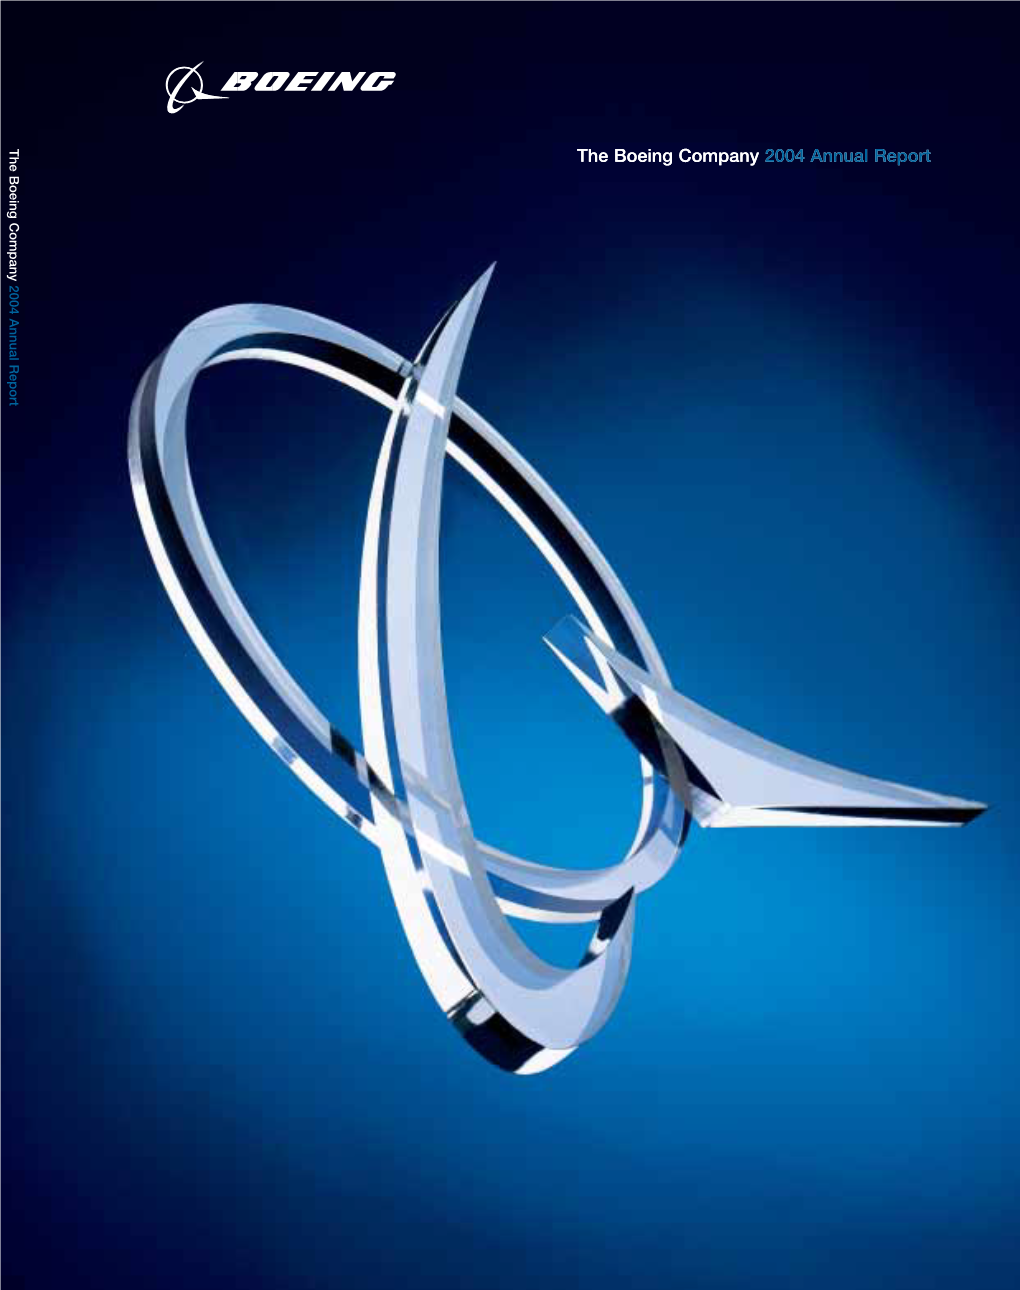 The Boeing Company 2004 Annual Report the Boeing Company 2004 Annual Report